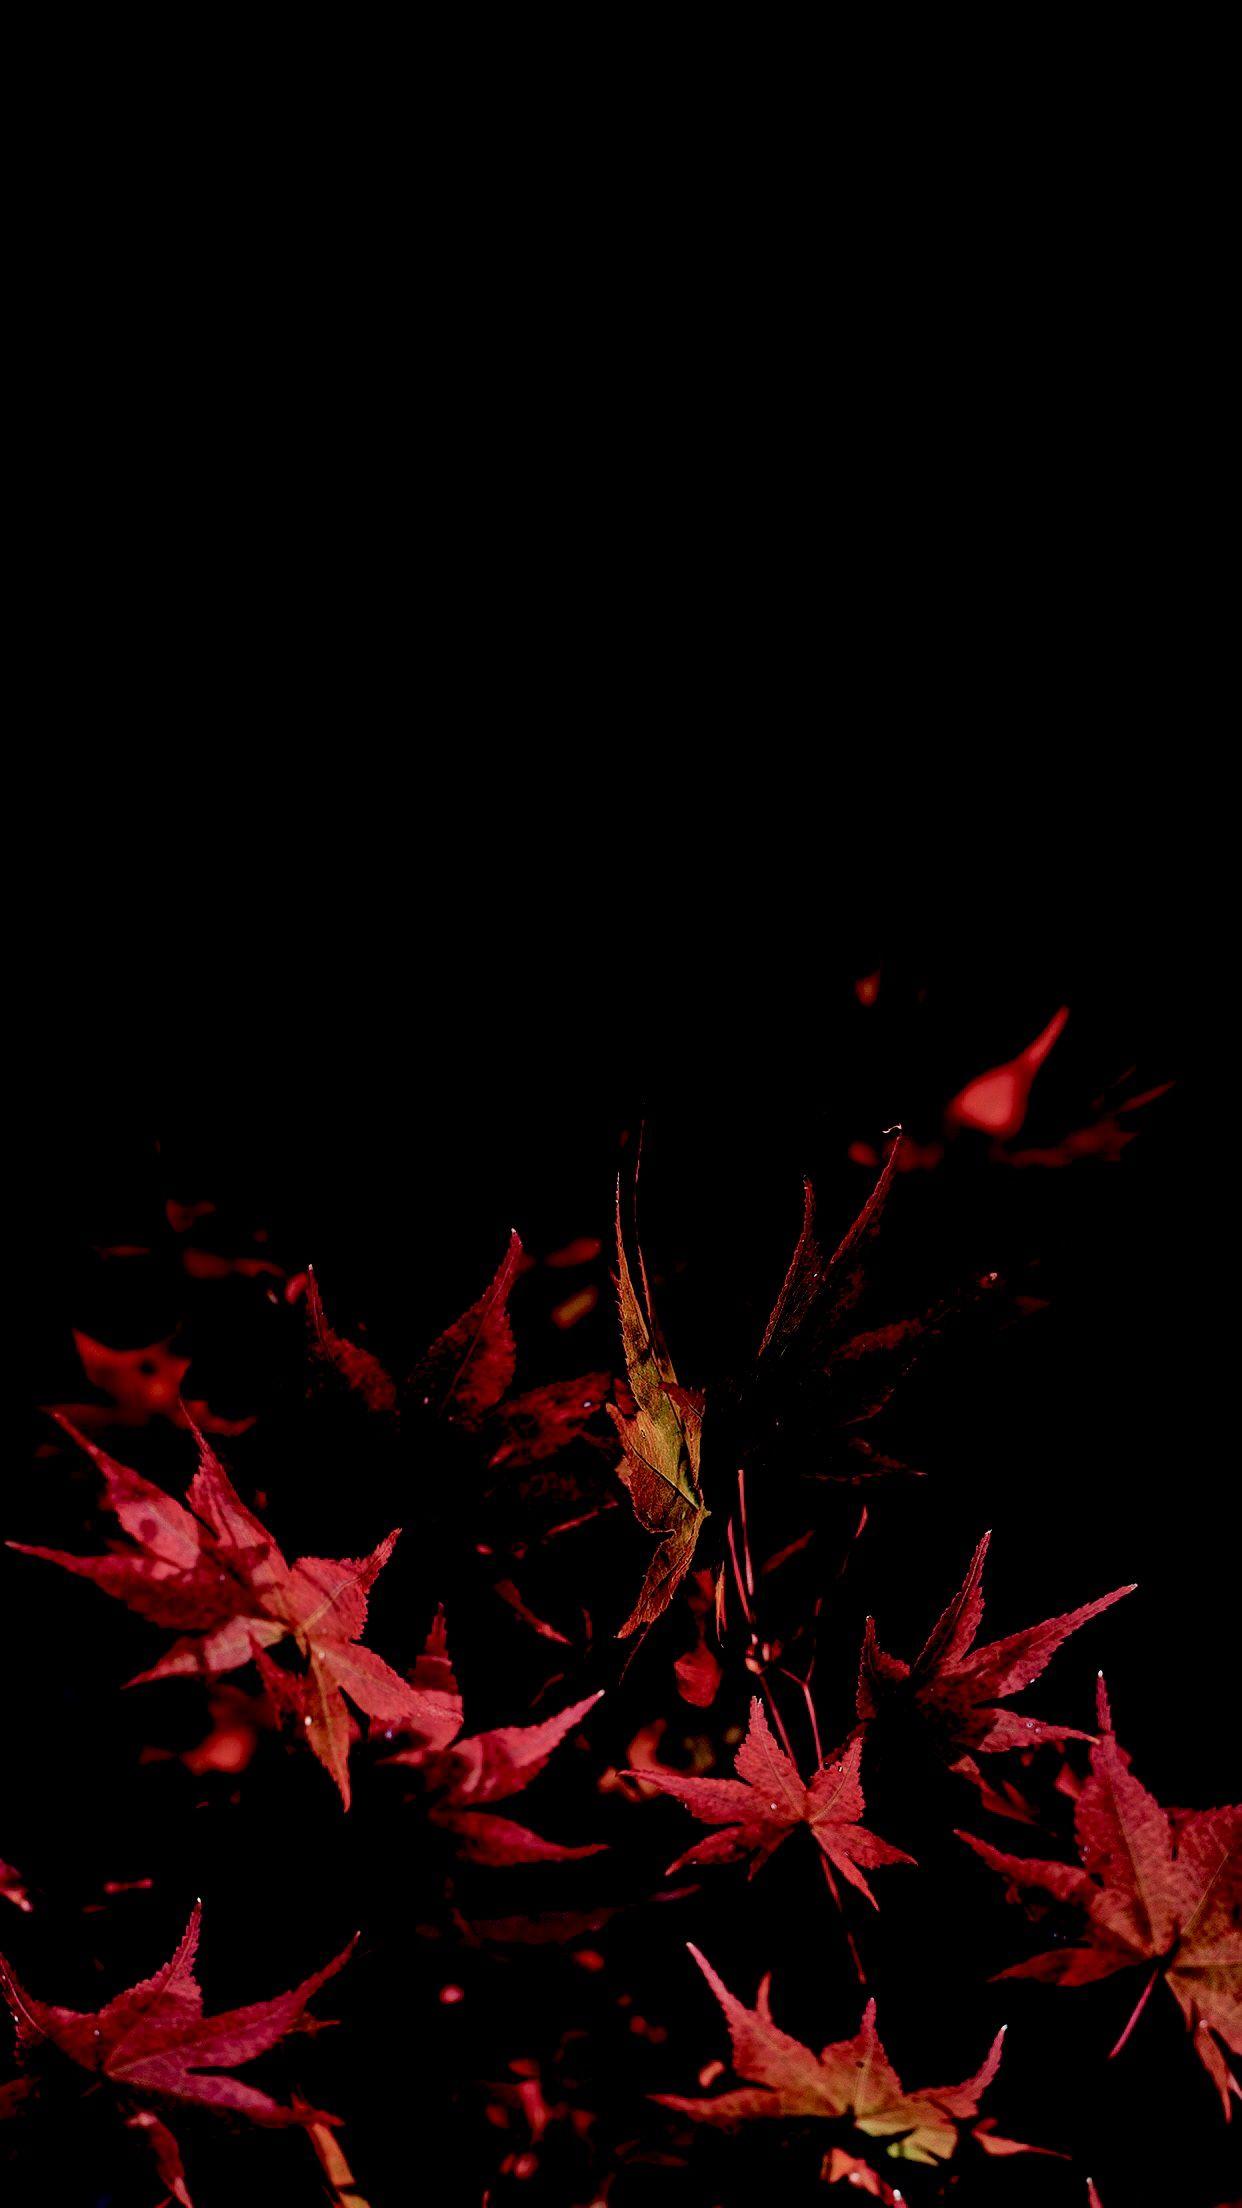 My current iPhone X wallpapers [1242 x 2208]. Adjusted the black